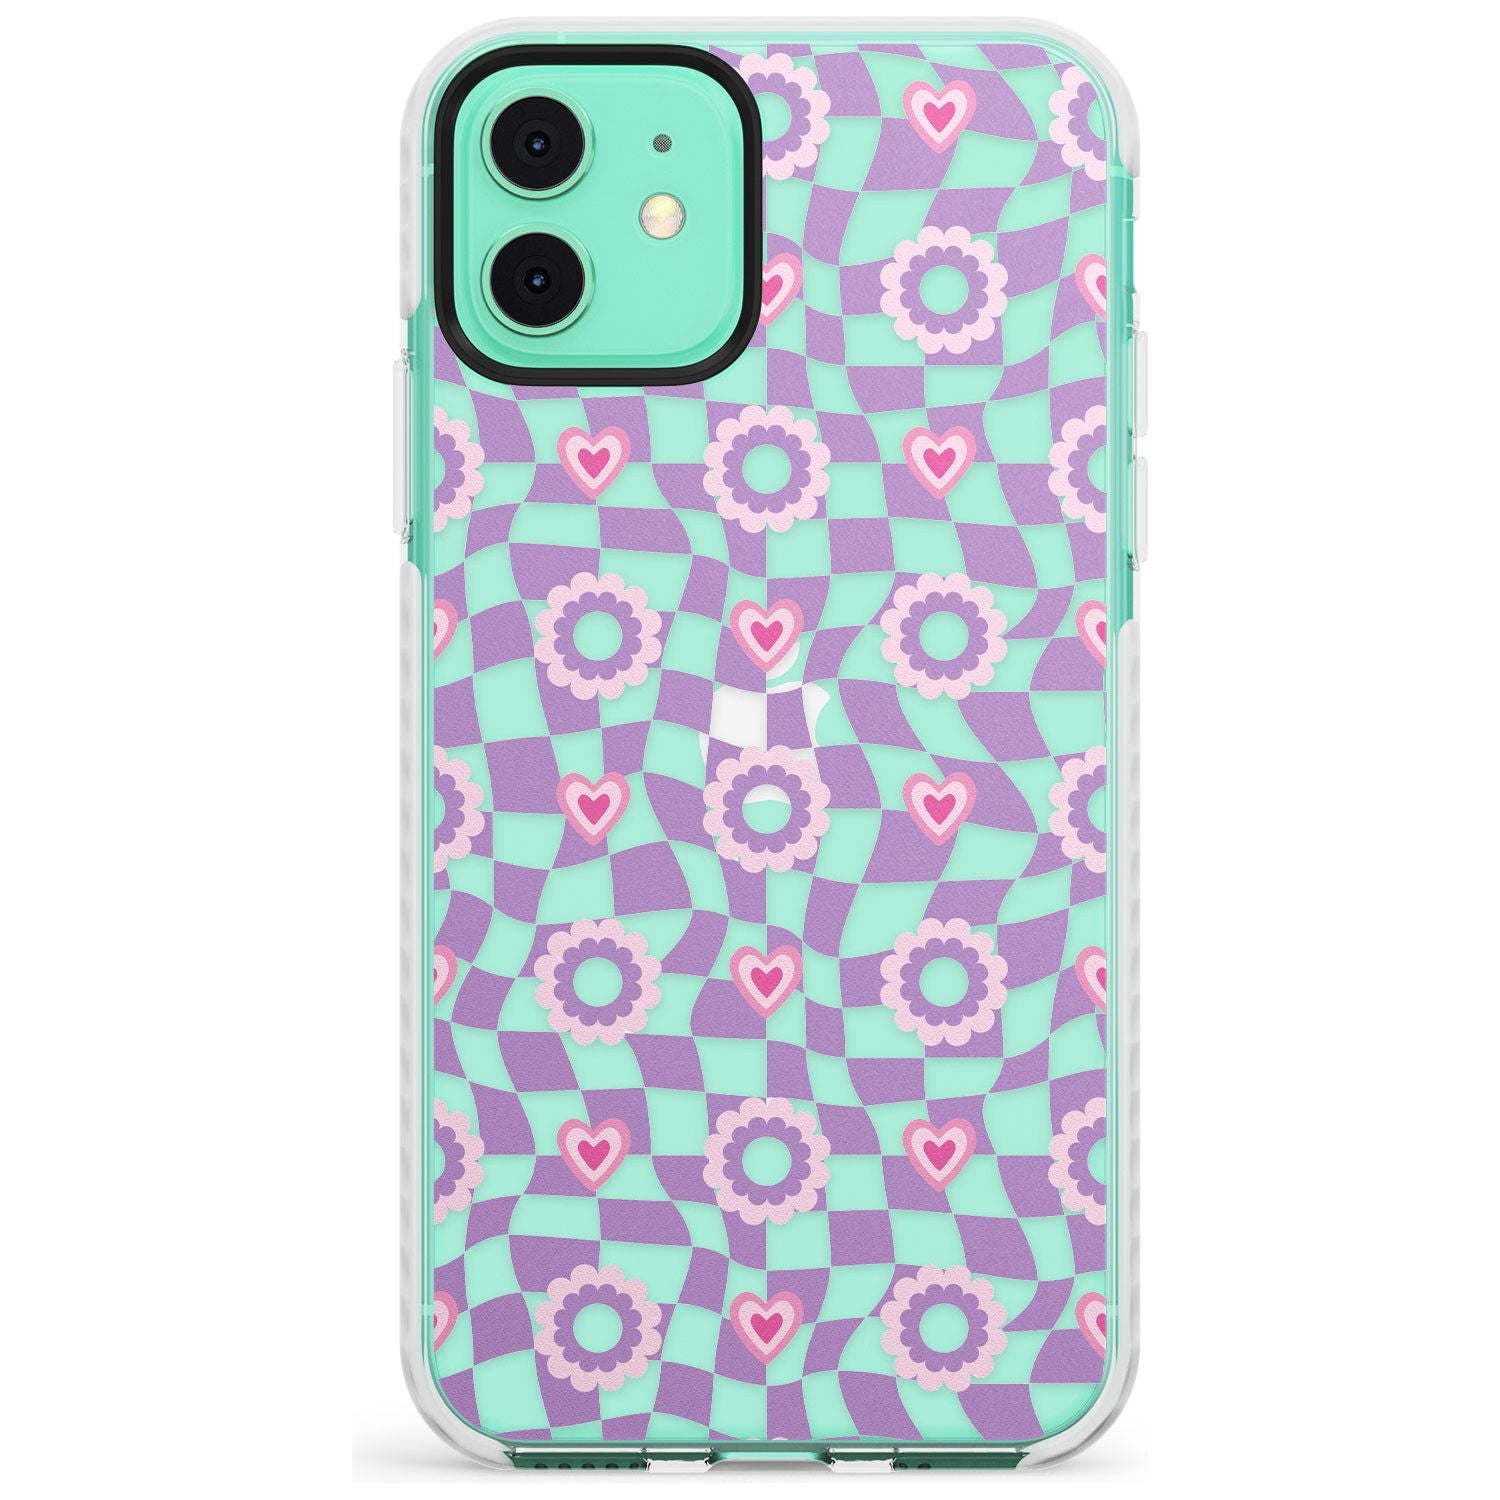 Checkered Love Pattern Impact Phone Case for iPhone 11